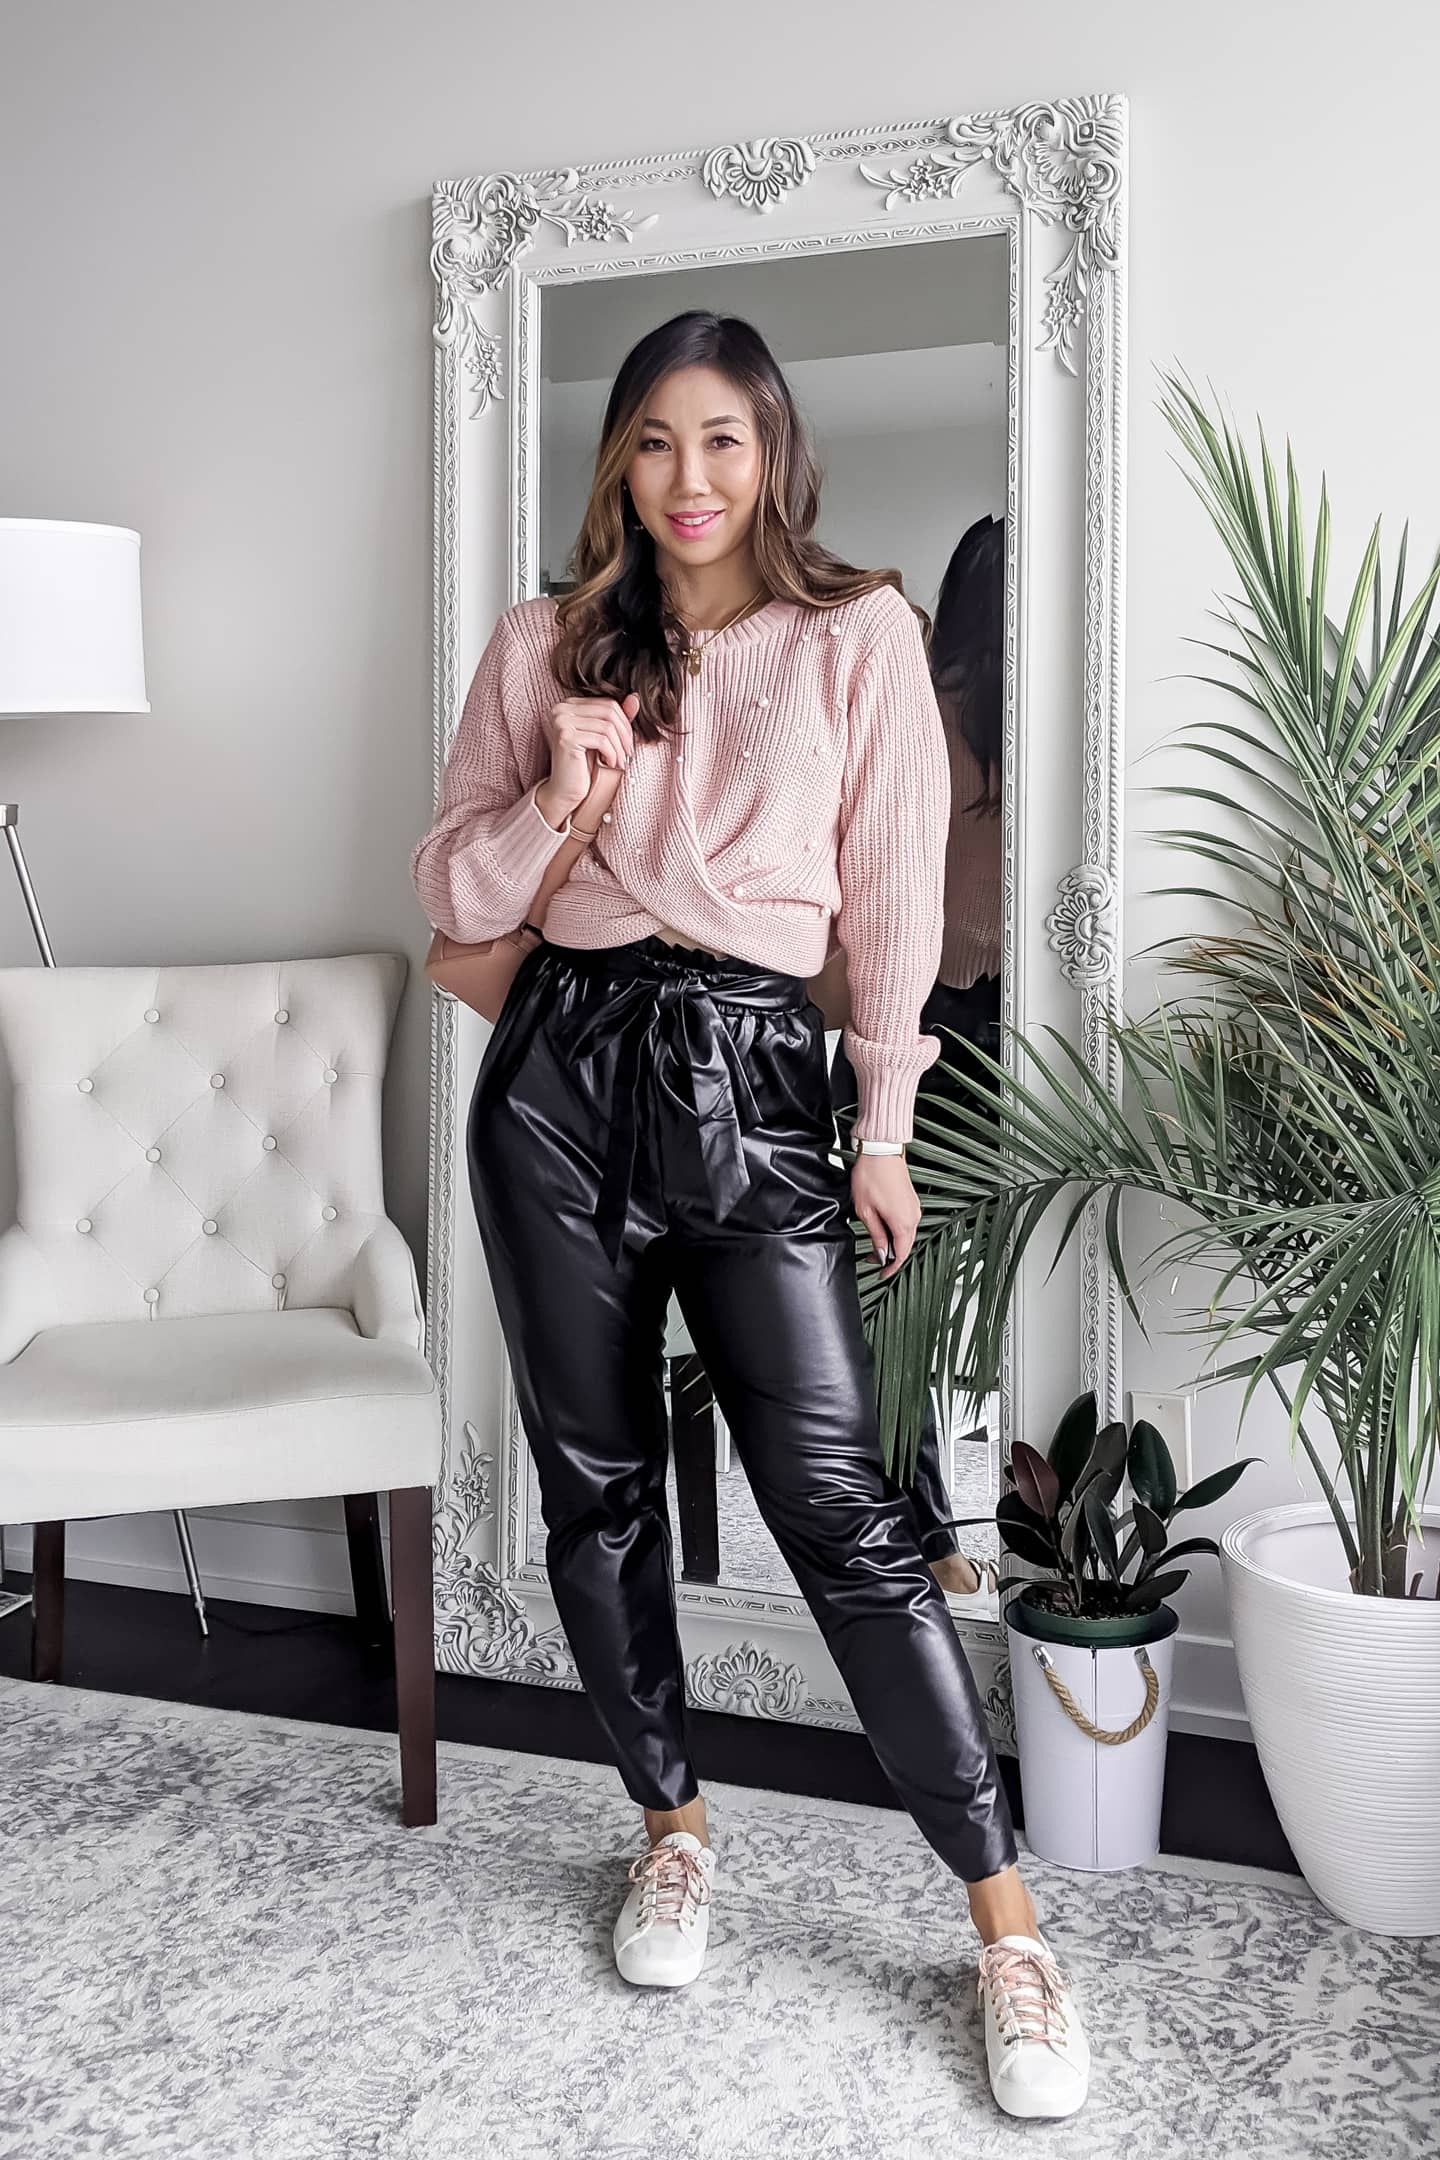 Women Leather Pants with Mules & Sweater